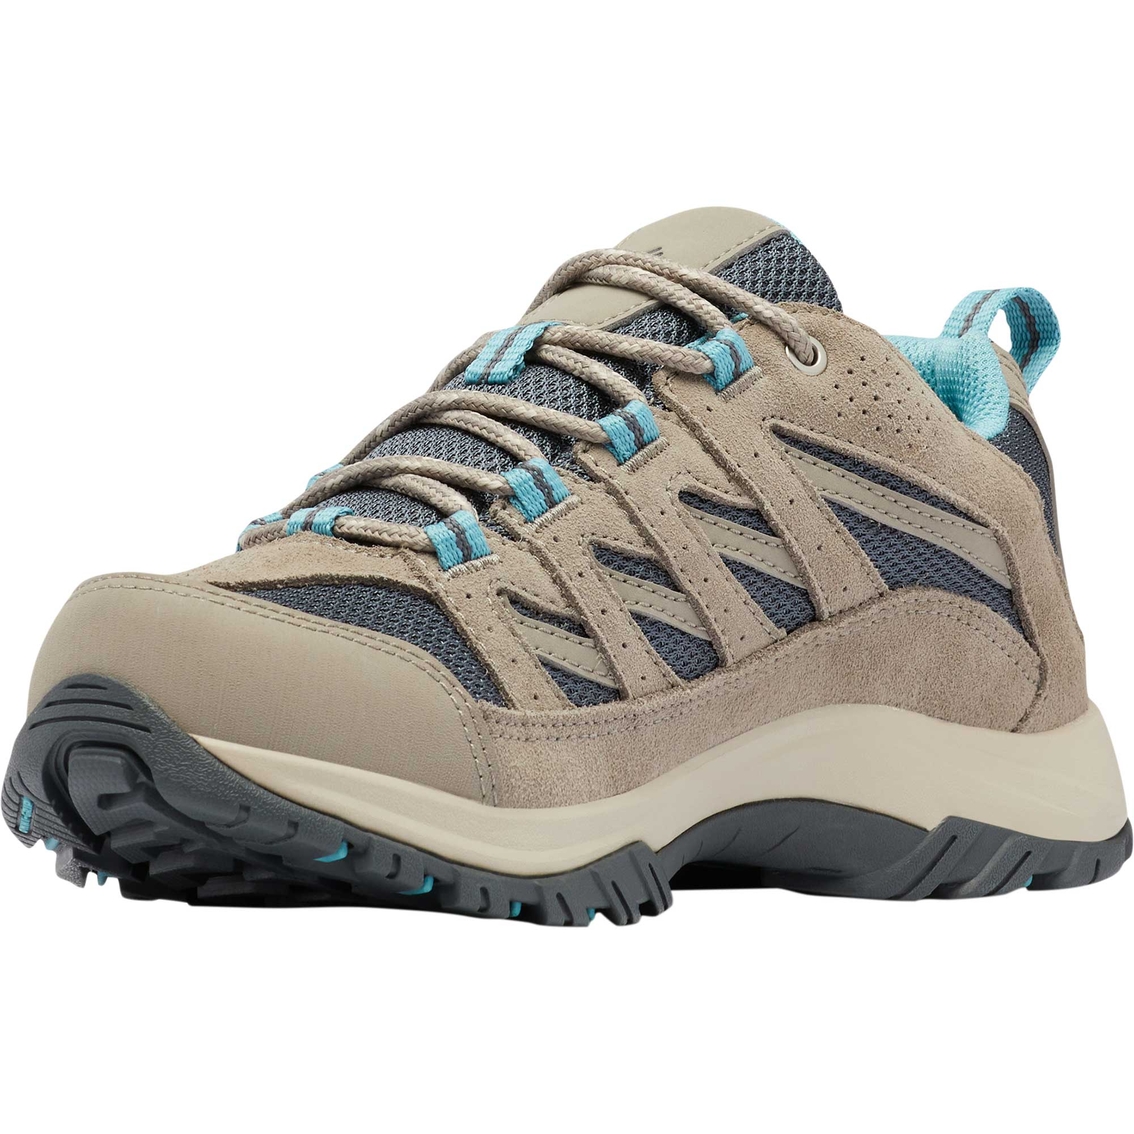 Columbia Women's Crestwood Hiking Boots - Image 9 of 9